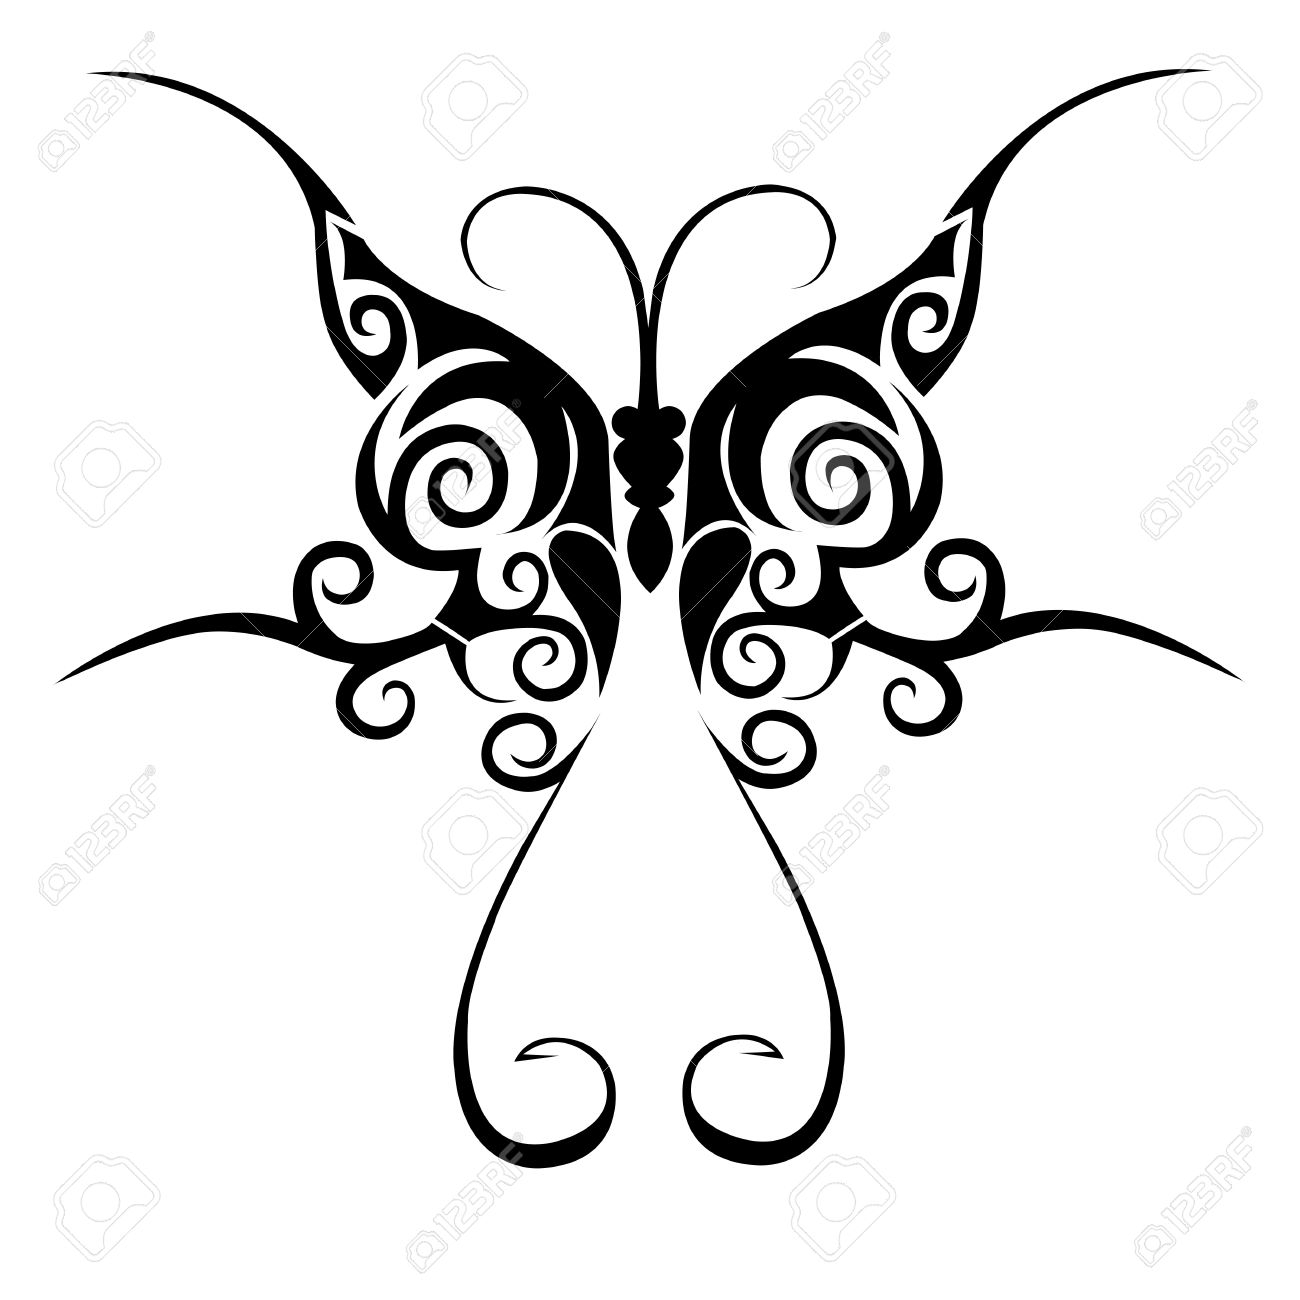 Tribal Butterfly Tattoo Royalty Free Cliparts Vectors And Stock inside proportions 1300 X 1300